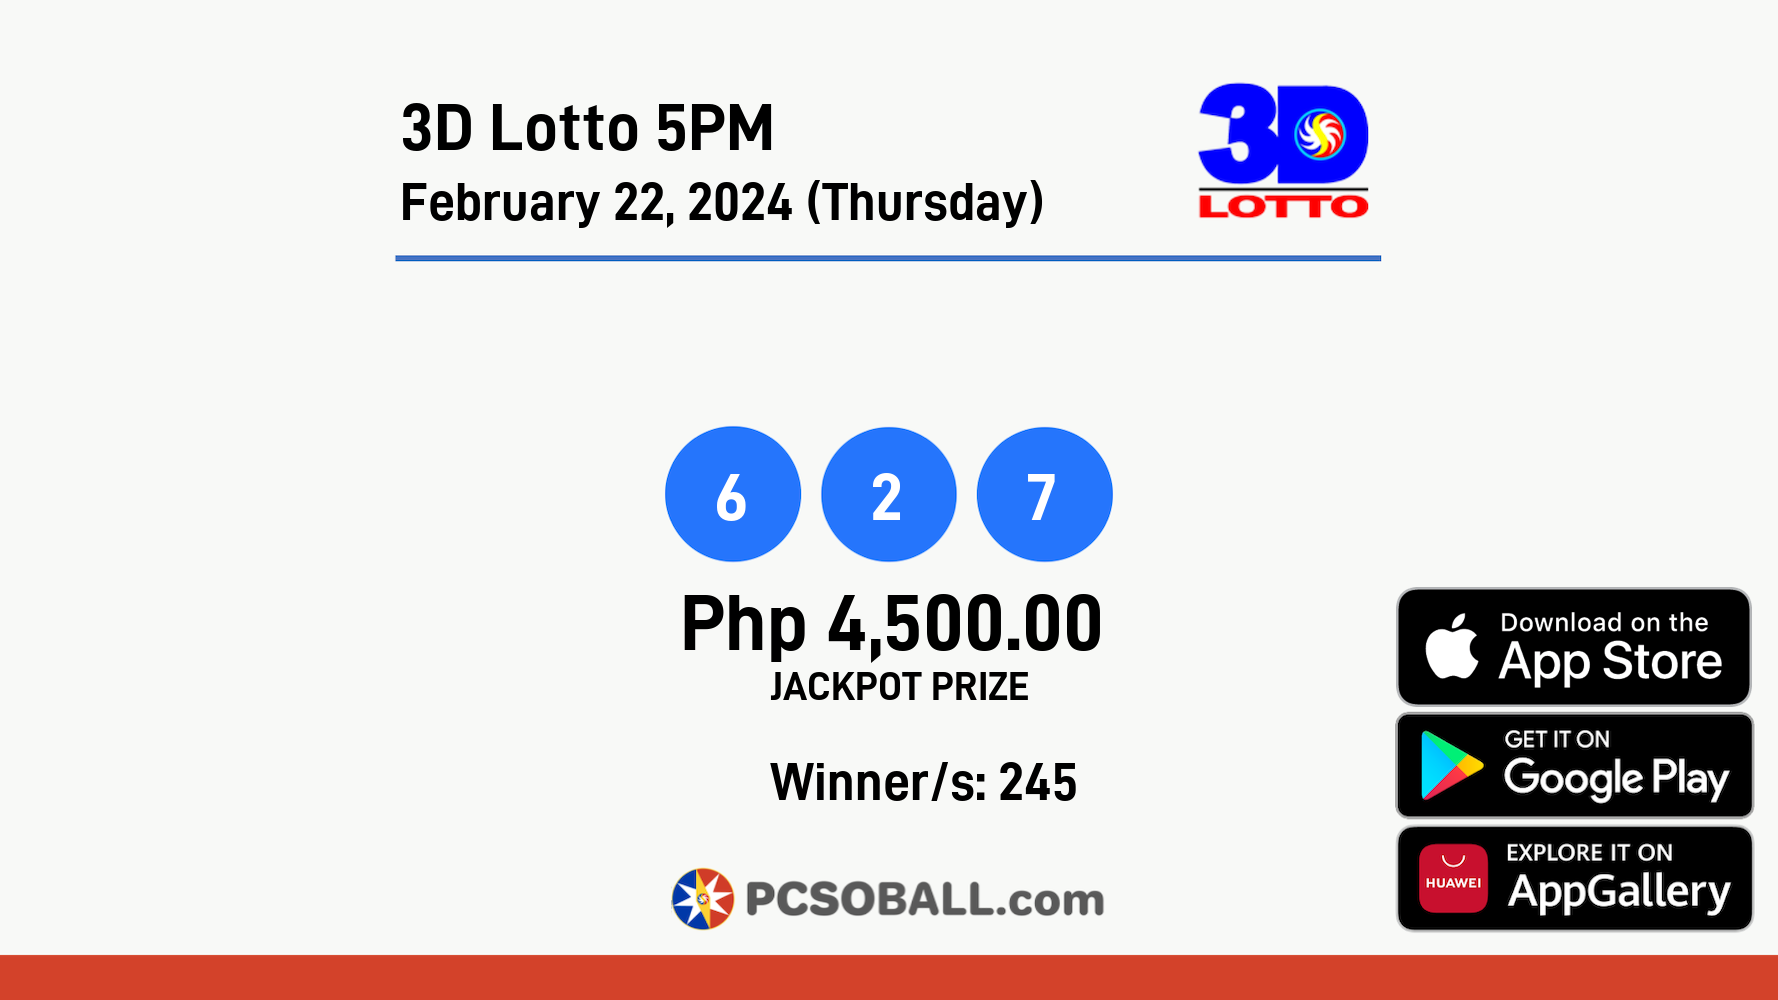 3D Lotto 5PM February 22, 2024 (Thursday) Result